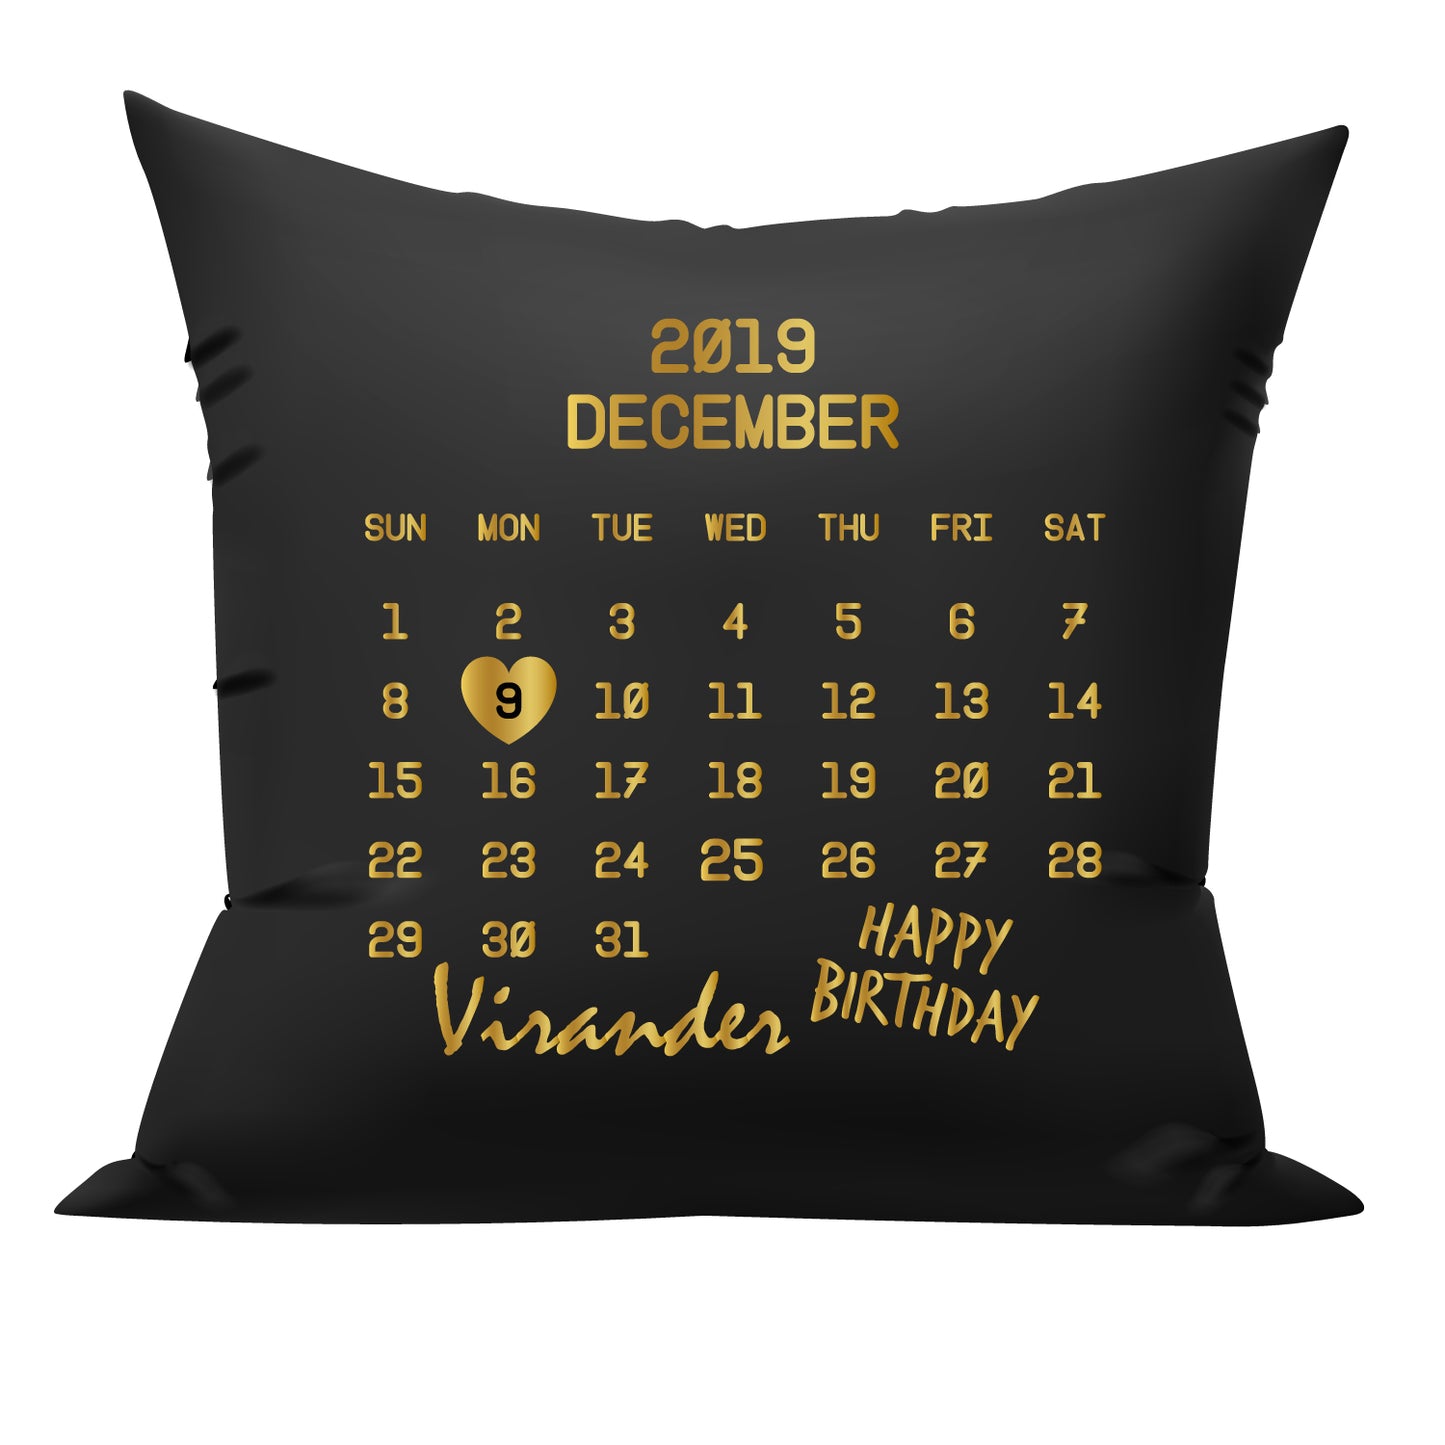 customized cushions online